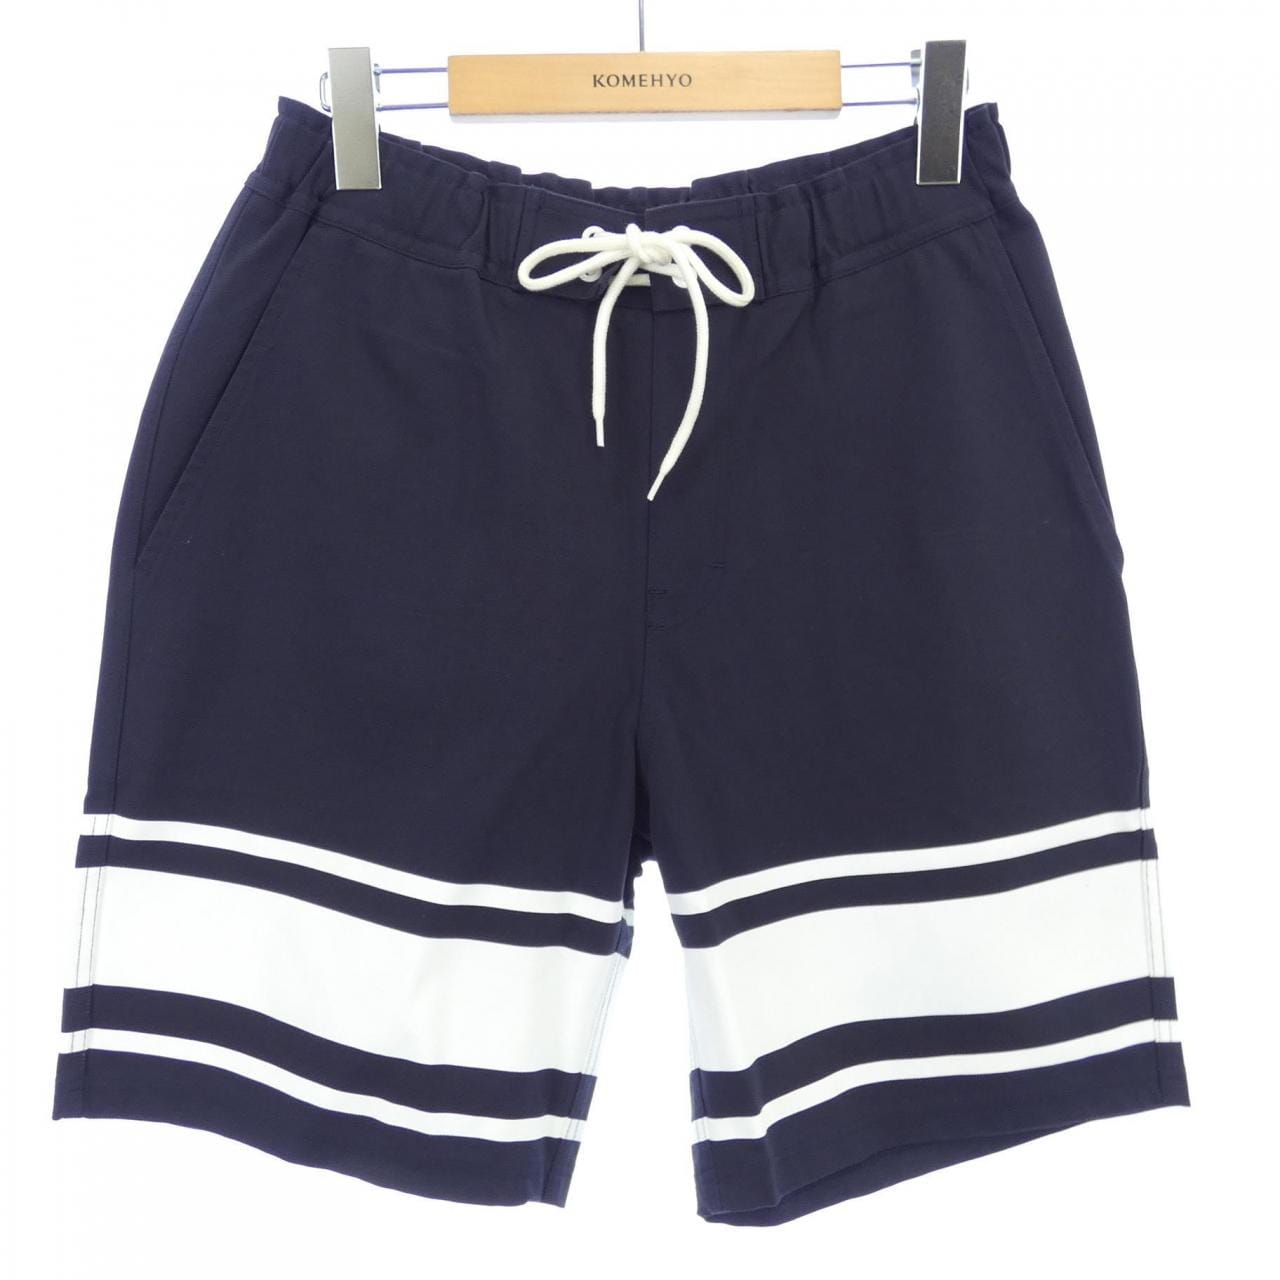 THE POOL Shorts